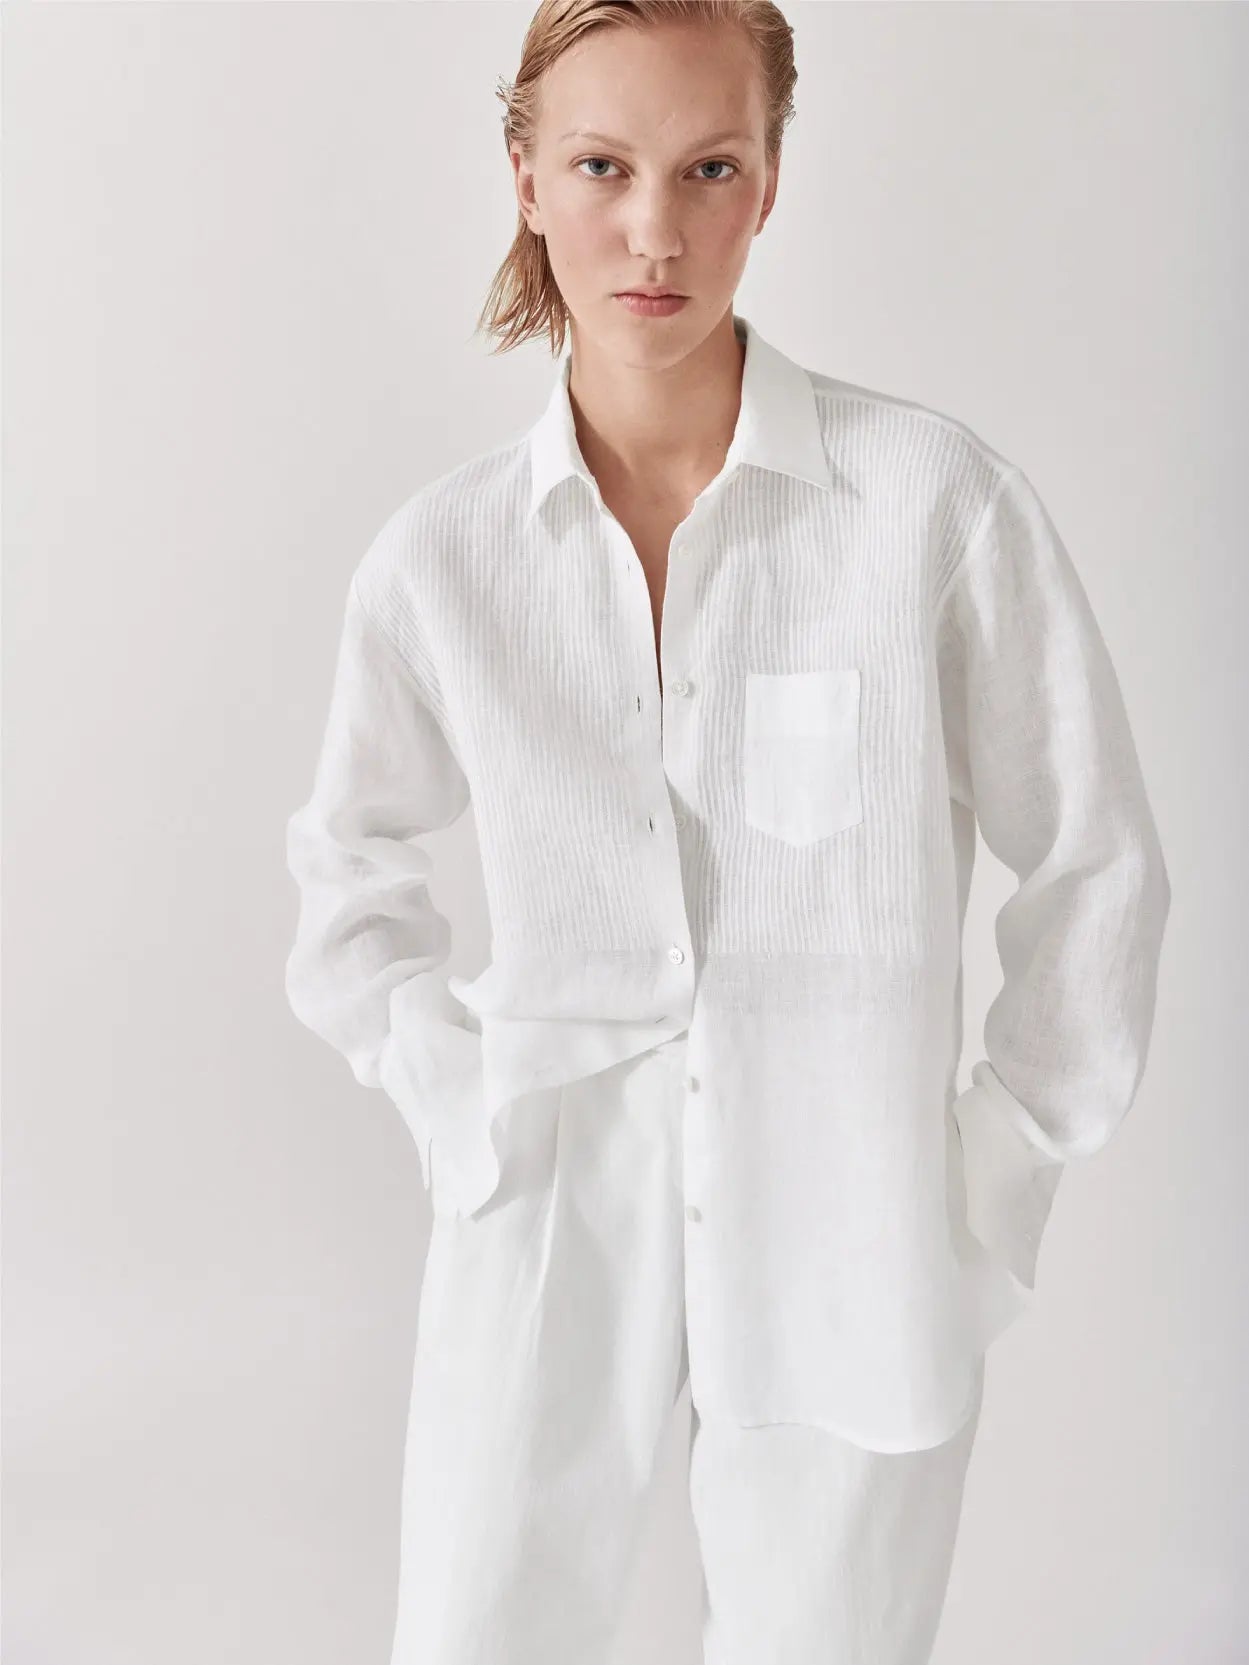 A white long-sleeve button-up shirt with a single chest pocket and a classic collar is neatly displayed against a plain white background. The Galla Linen Shirt Block Print Stripe by Jan Machenhauer, available at Bassalstore in Barcelona, features a relaxed fit with slightly rounded hems.